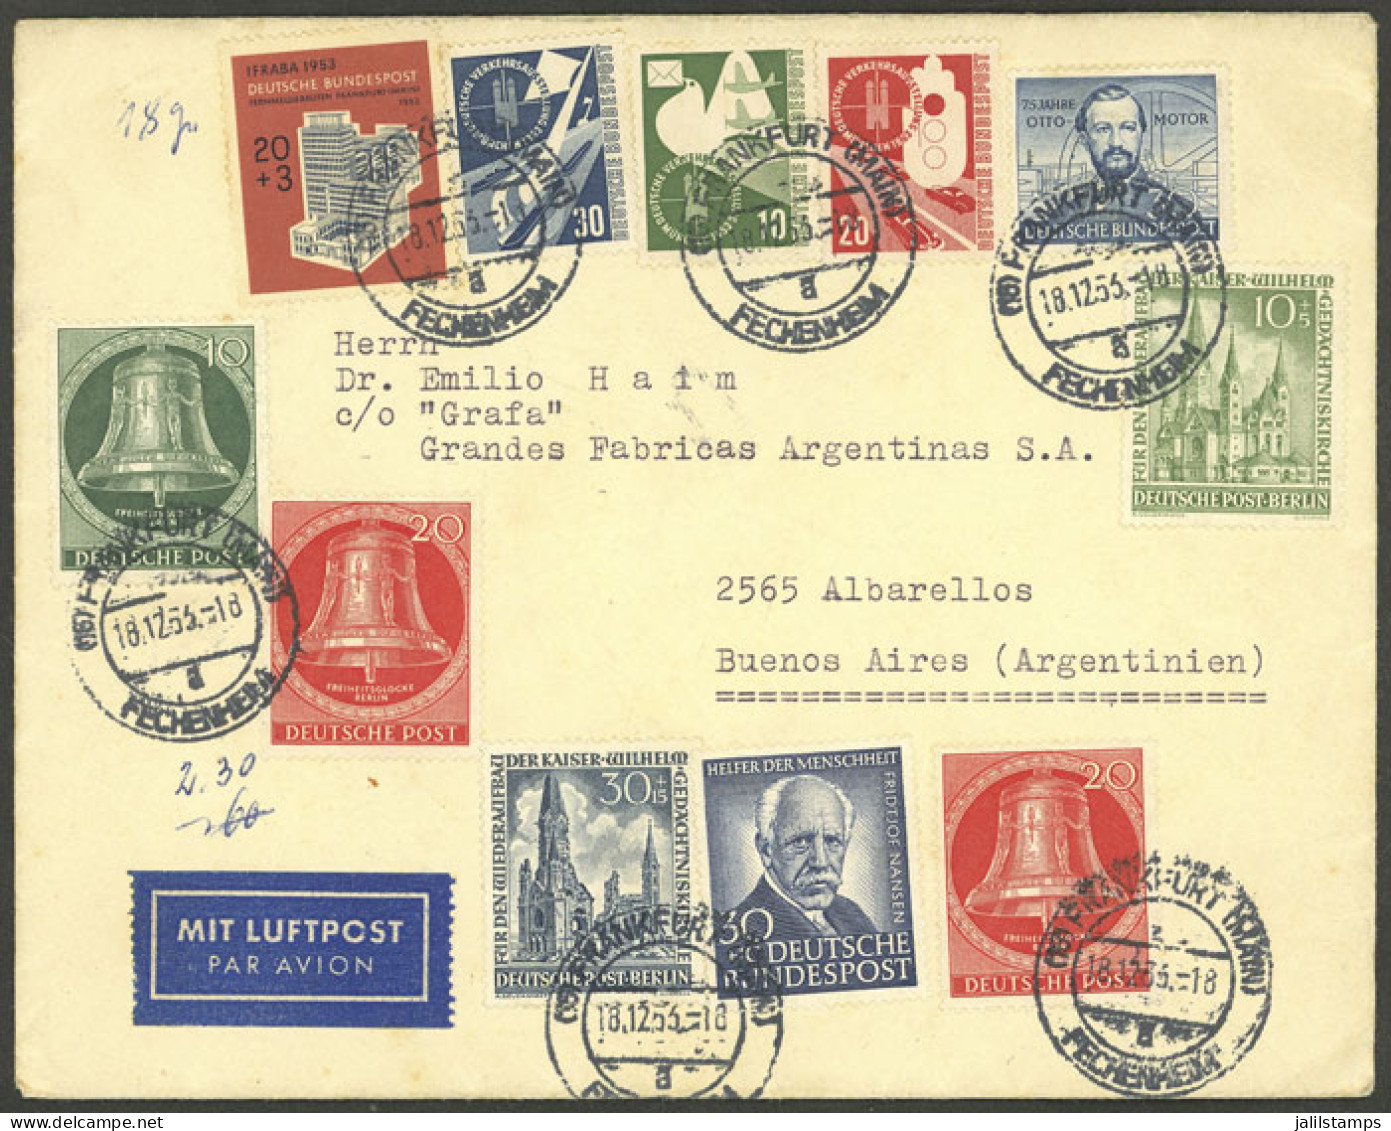 WEST GERMANY: 18/DE/1953 Frankfurt - Argentina, Airmail Cover With Spectacular Multcolor Postage, Very Fine Quality. The - Briefe U. Dokumente